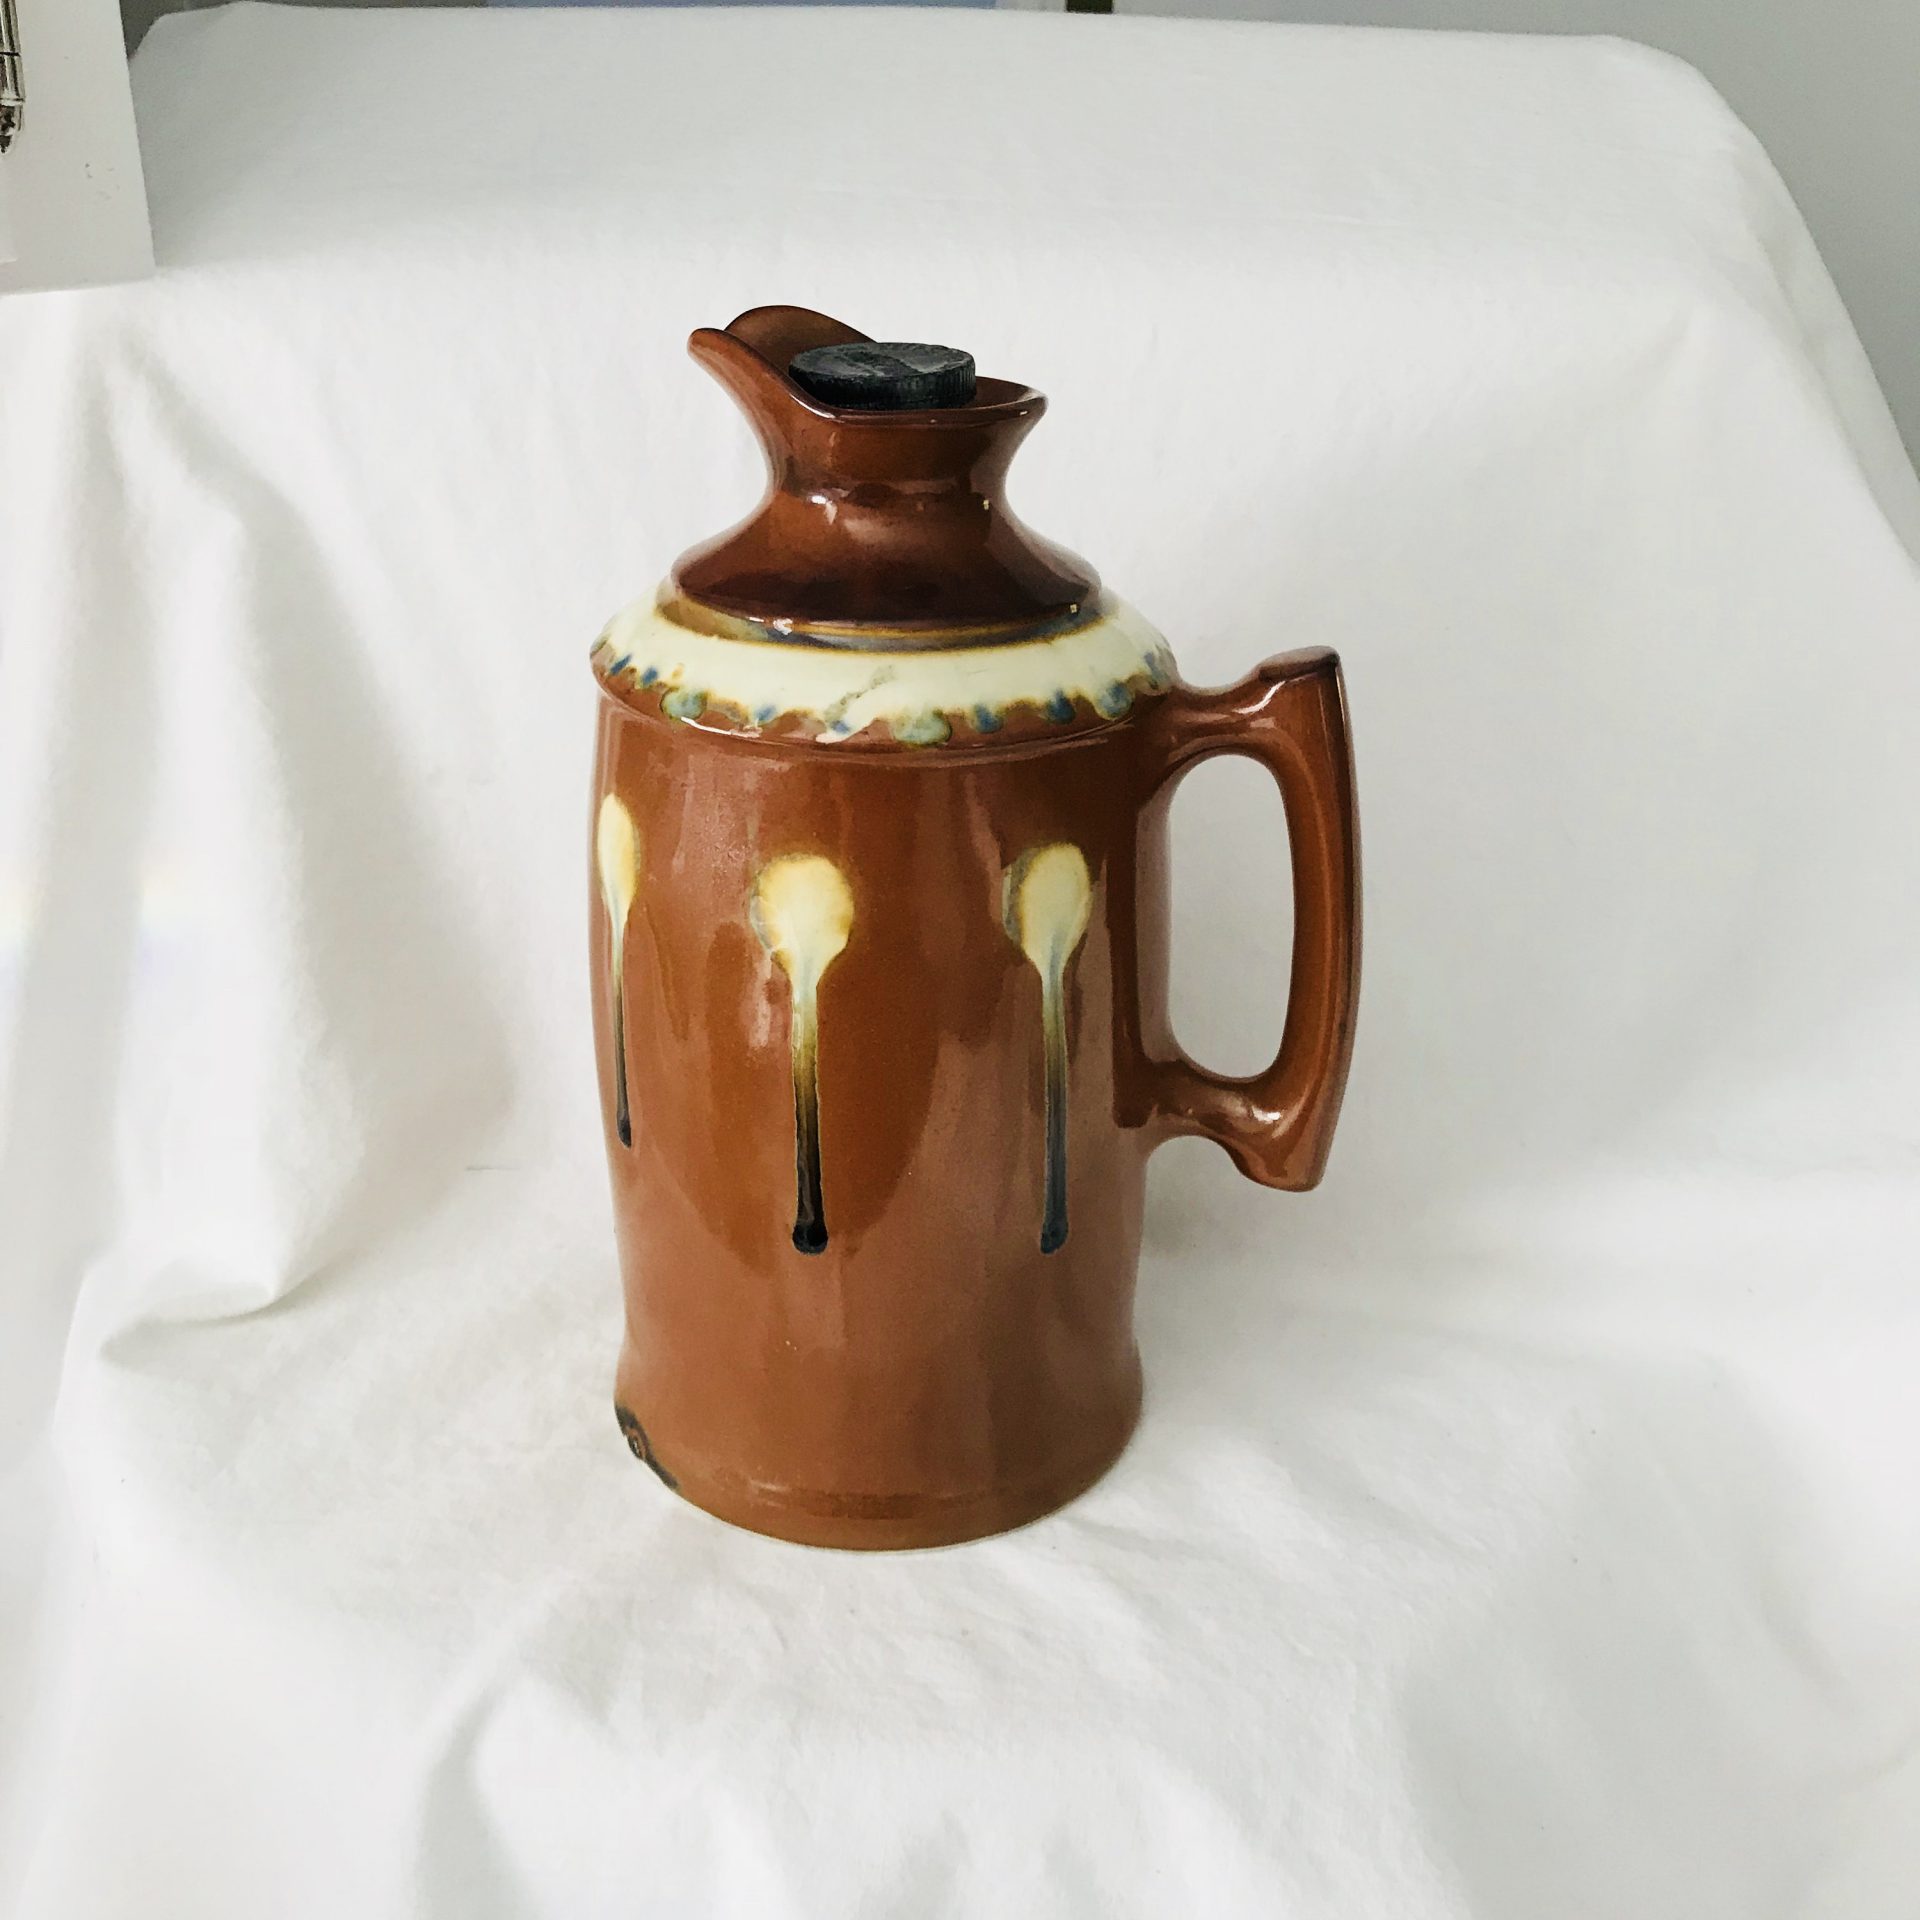 https://www.truevintageantiques.com/wp-content/uploads/2021/05/early-pottery-thermos-lined-warm-cold-drink-dispenser-storage-soup-water-glass-lined-with-thermos-cork-lid-blue-black-brown-pitcher-w-handle-60992f6e1-scaled.jpg